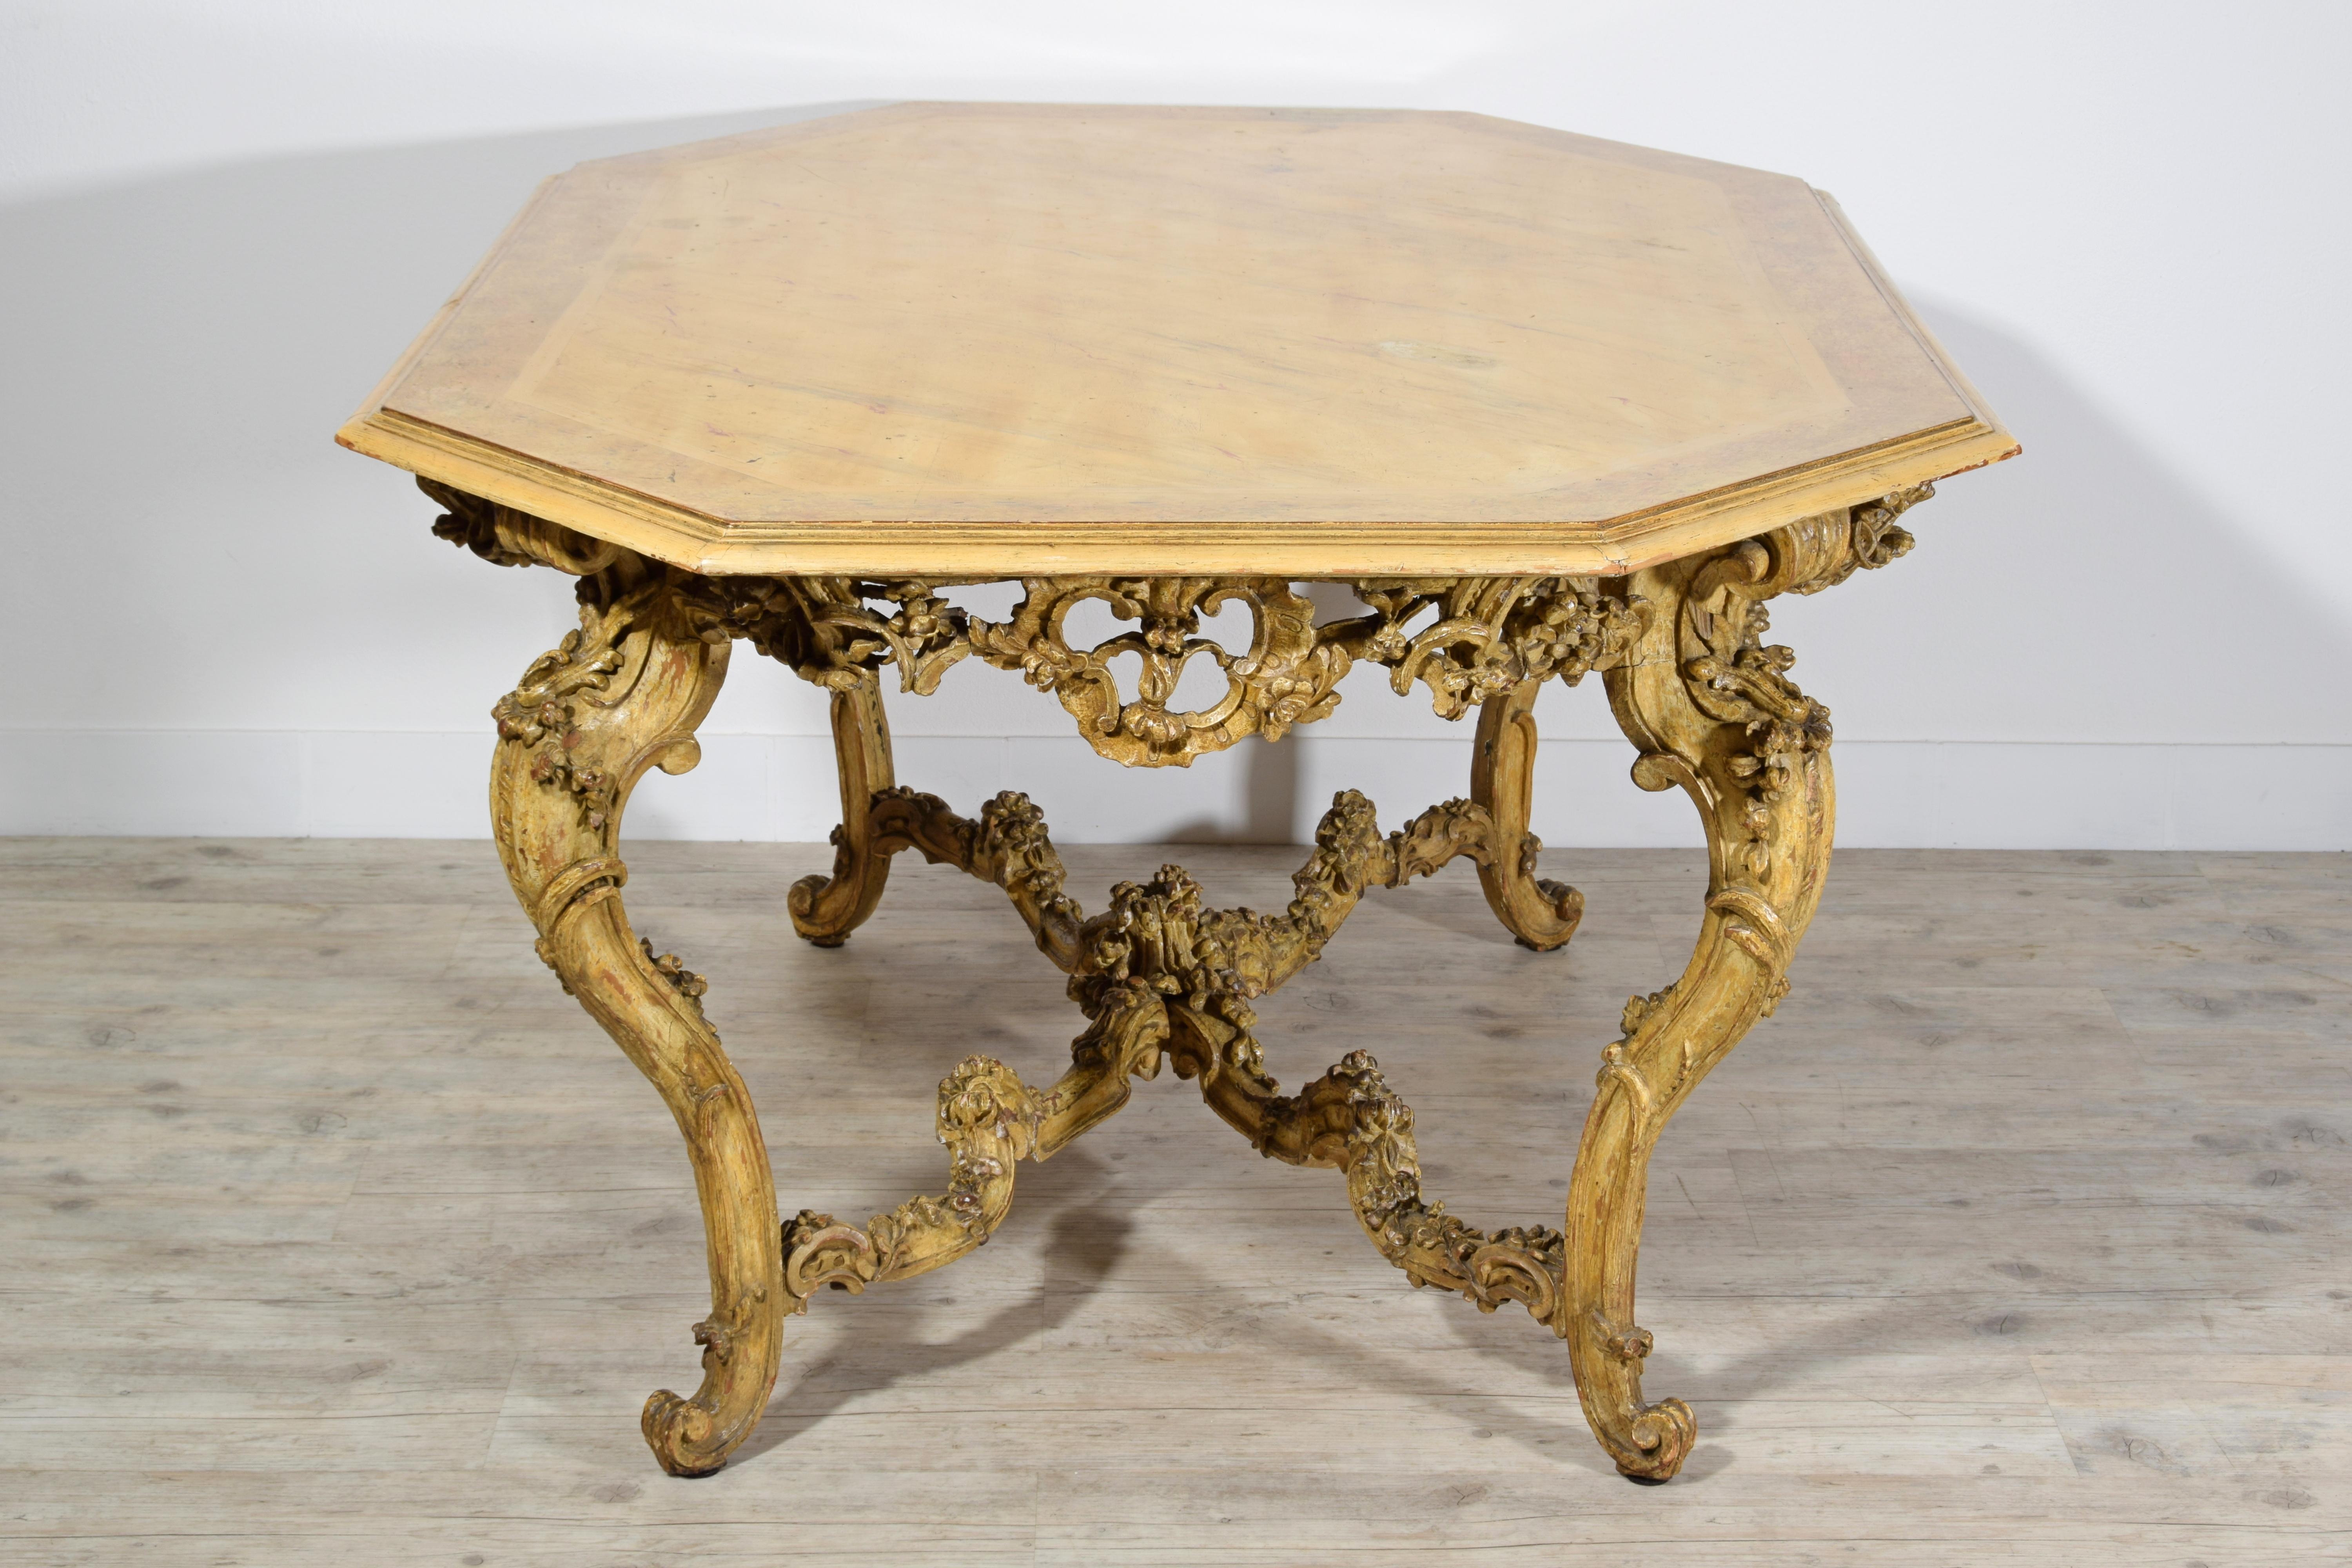 Italian Baroque Carved Gilt and Lacquered Wood Center Table, 18th Century 6